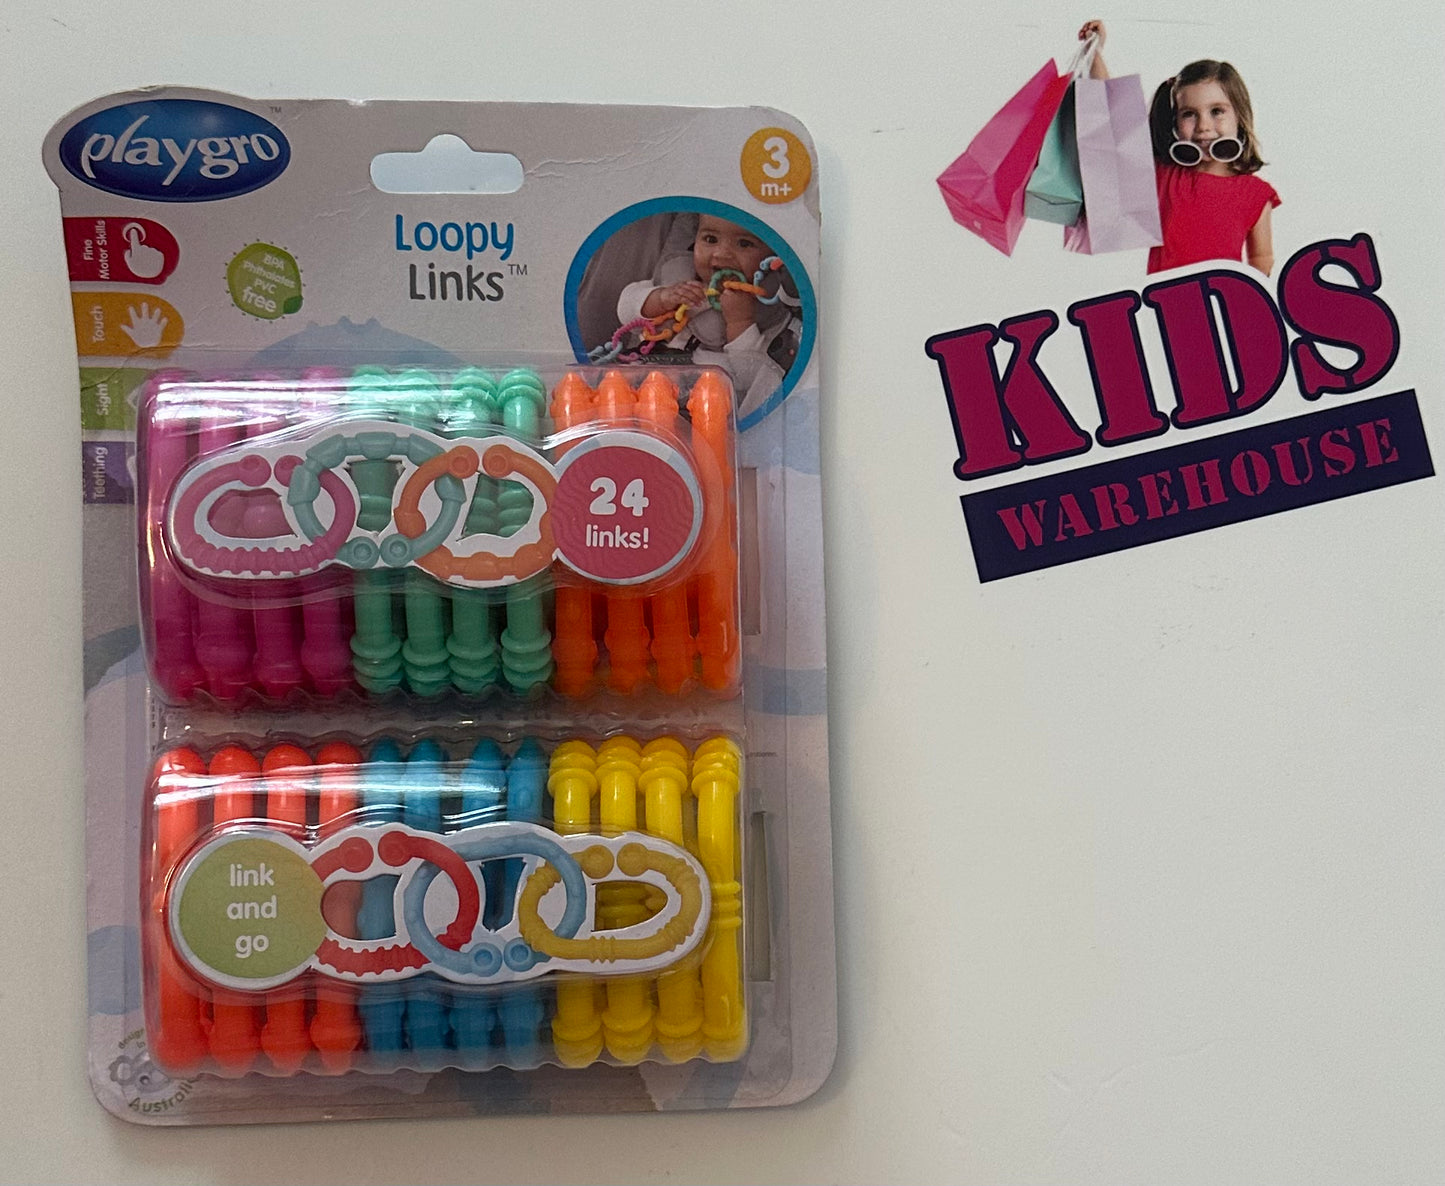 New Playgro Loopy Links